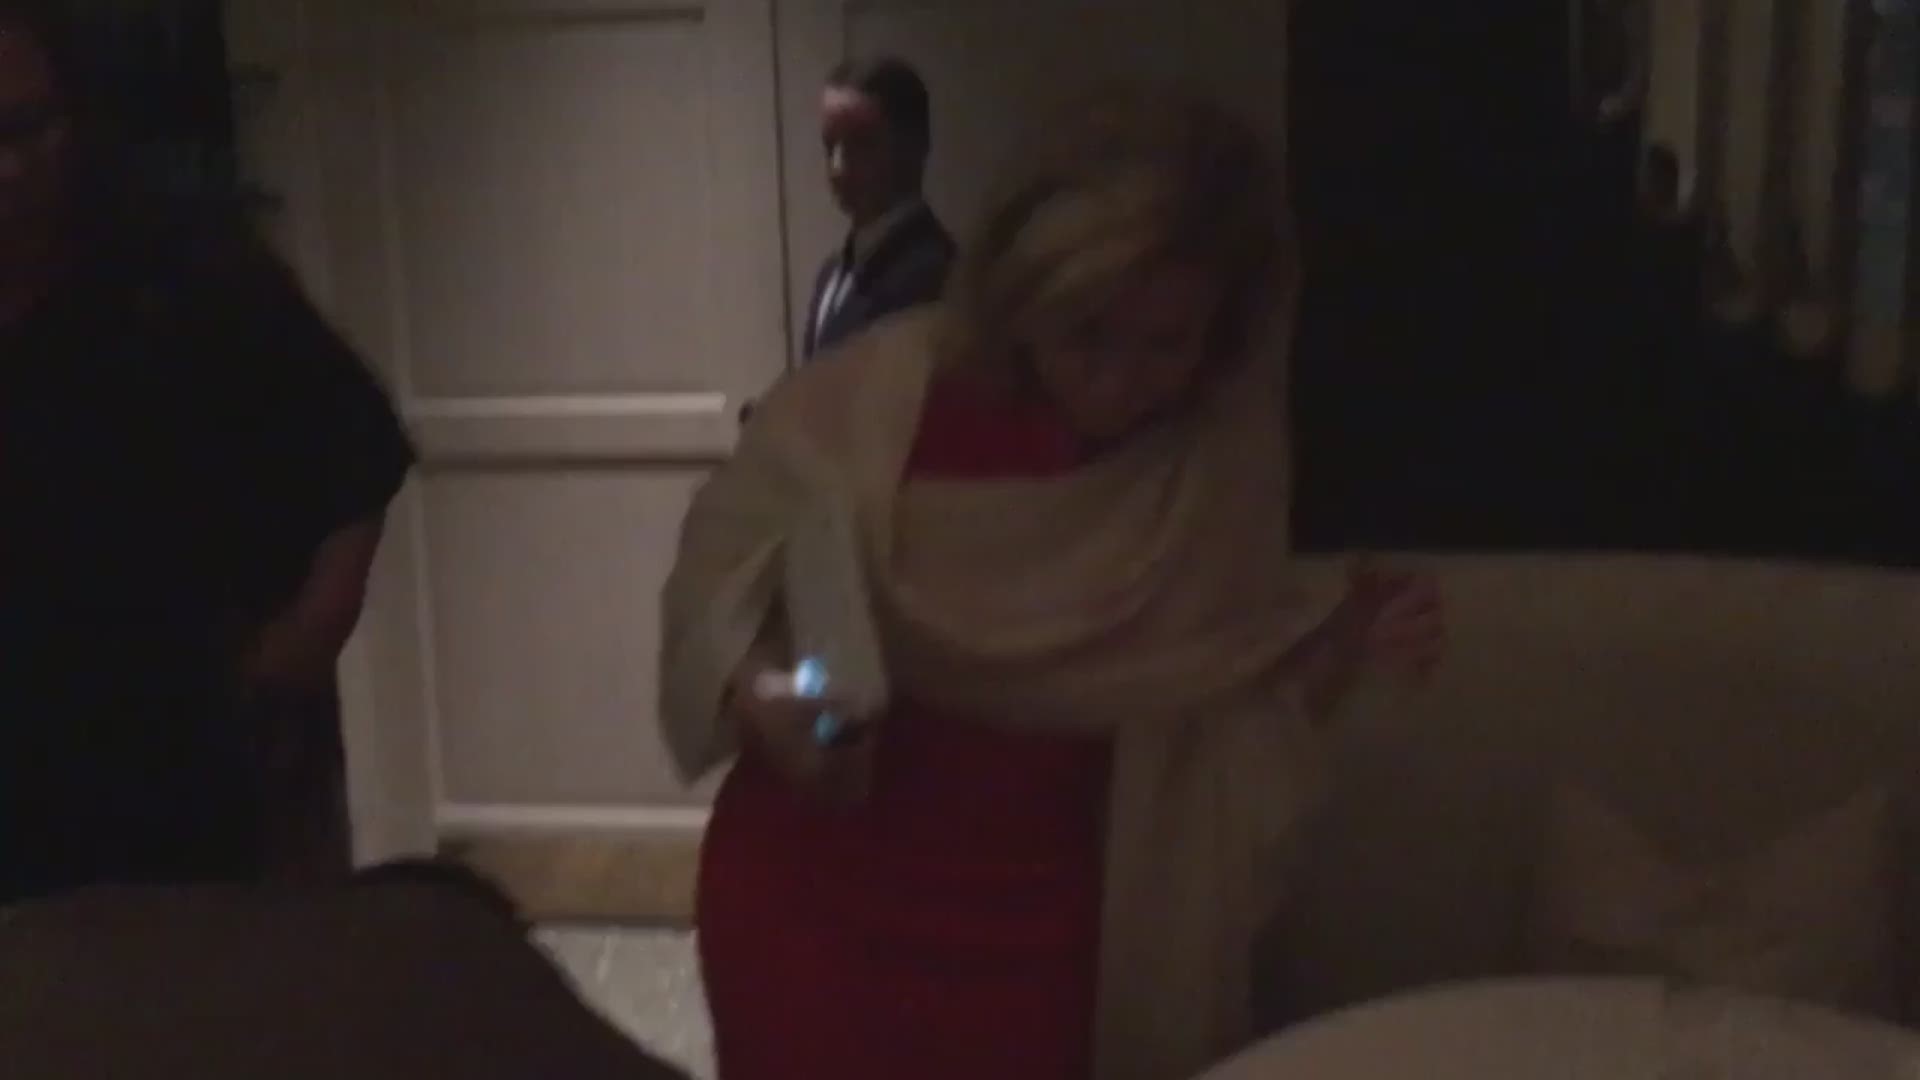 RAW: Ted Cruz approached by protesters at D.C. restaurant, chased out